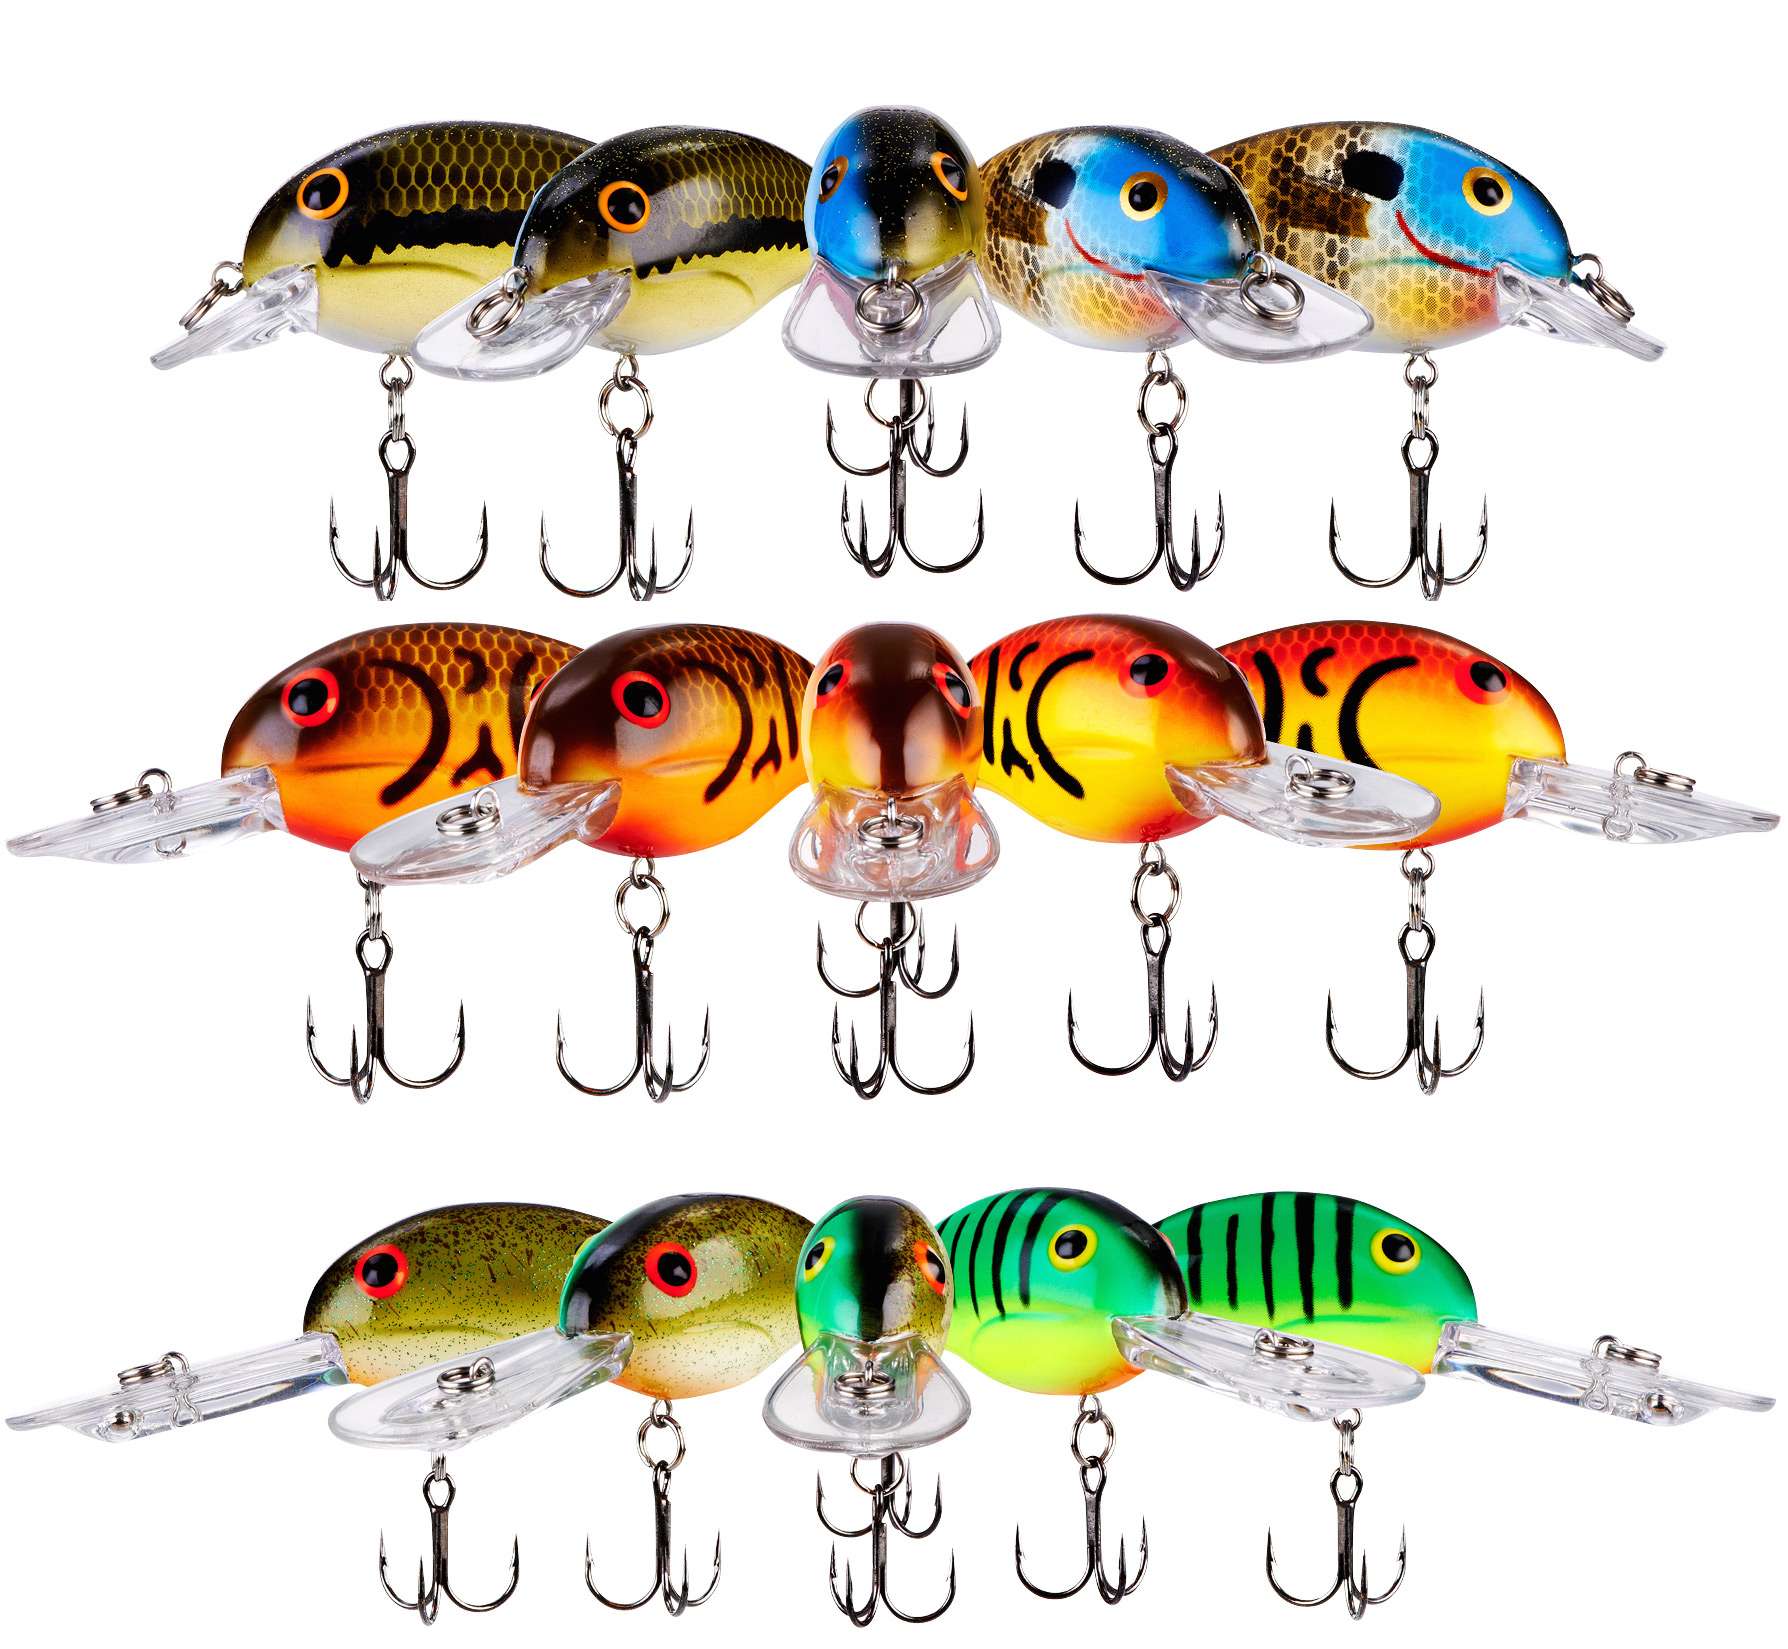 Professional Bait and Tackle Shop jackall lures fishing jigs OLD FISHING  LURES SALTWATER Discount Tackle Crankbaits